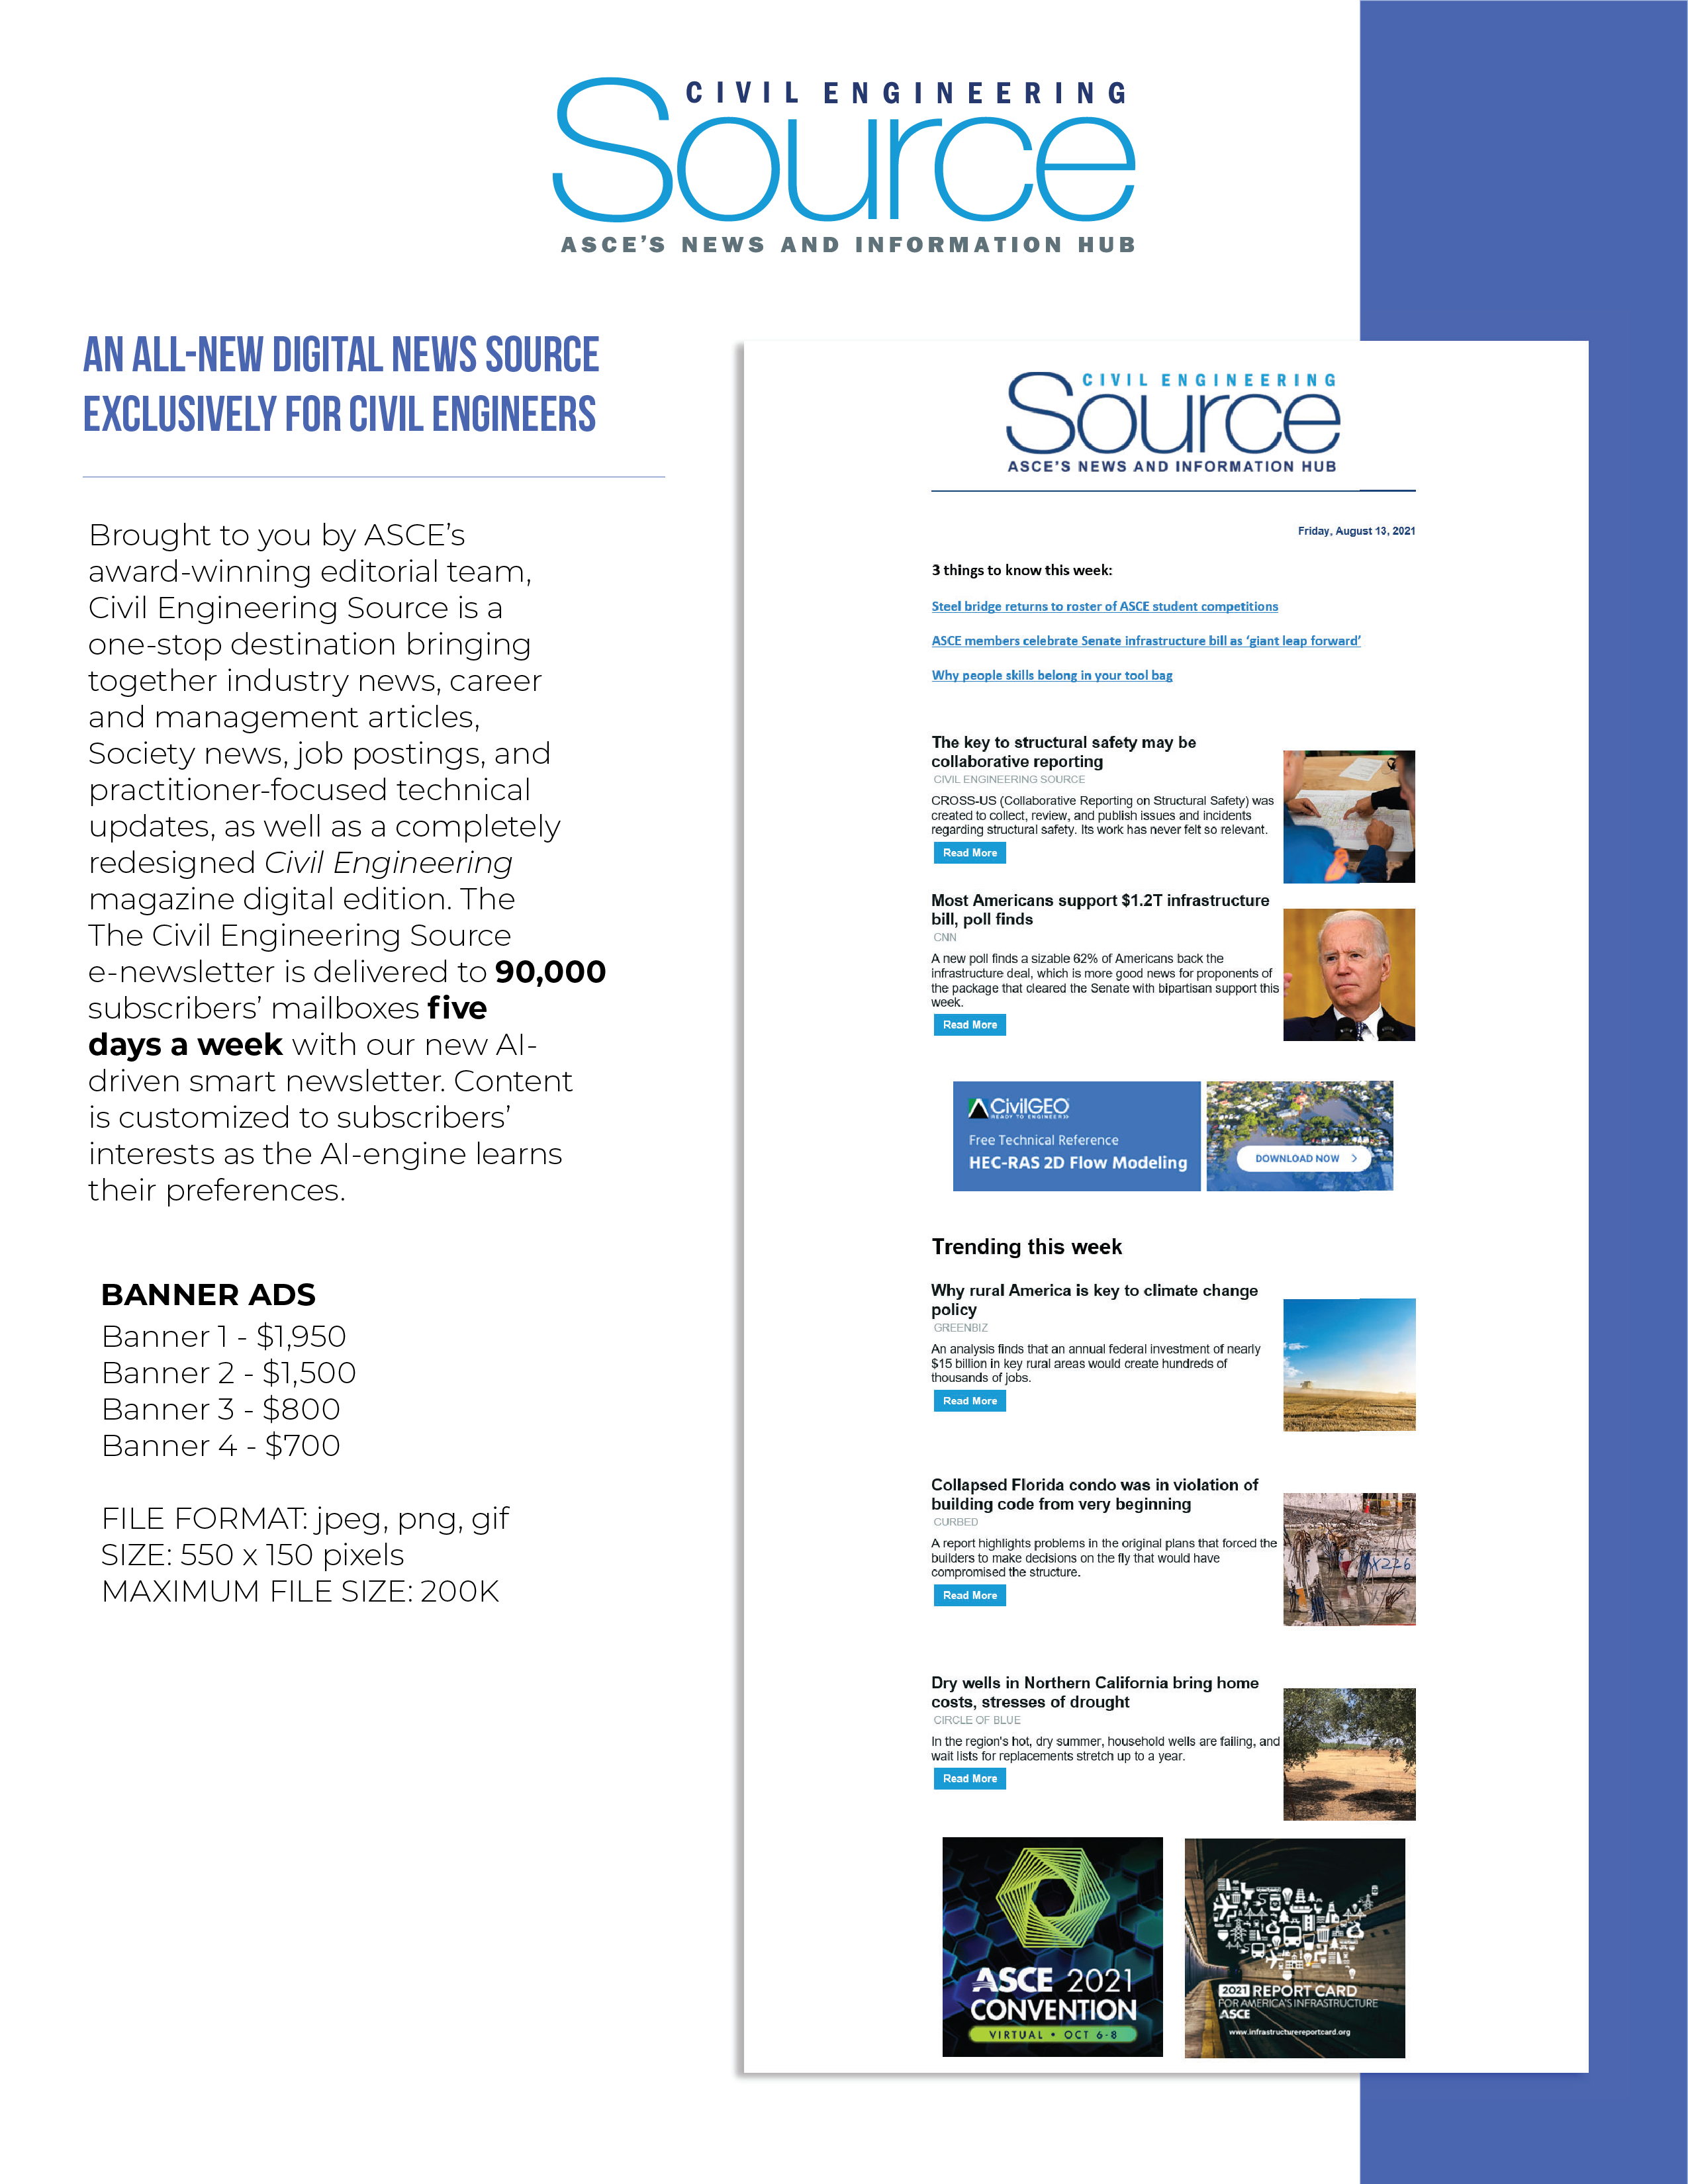 The Source e-newsletter